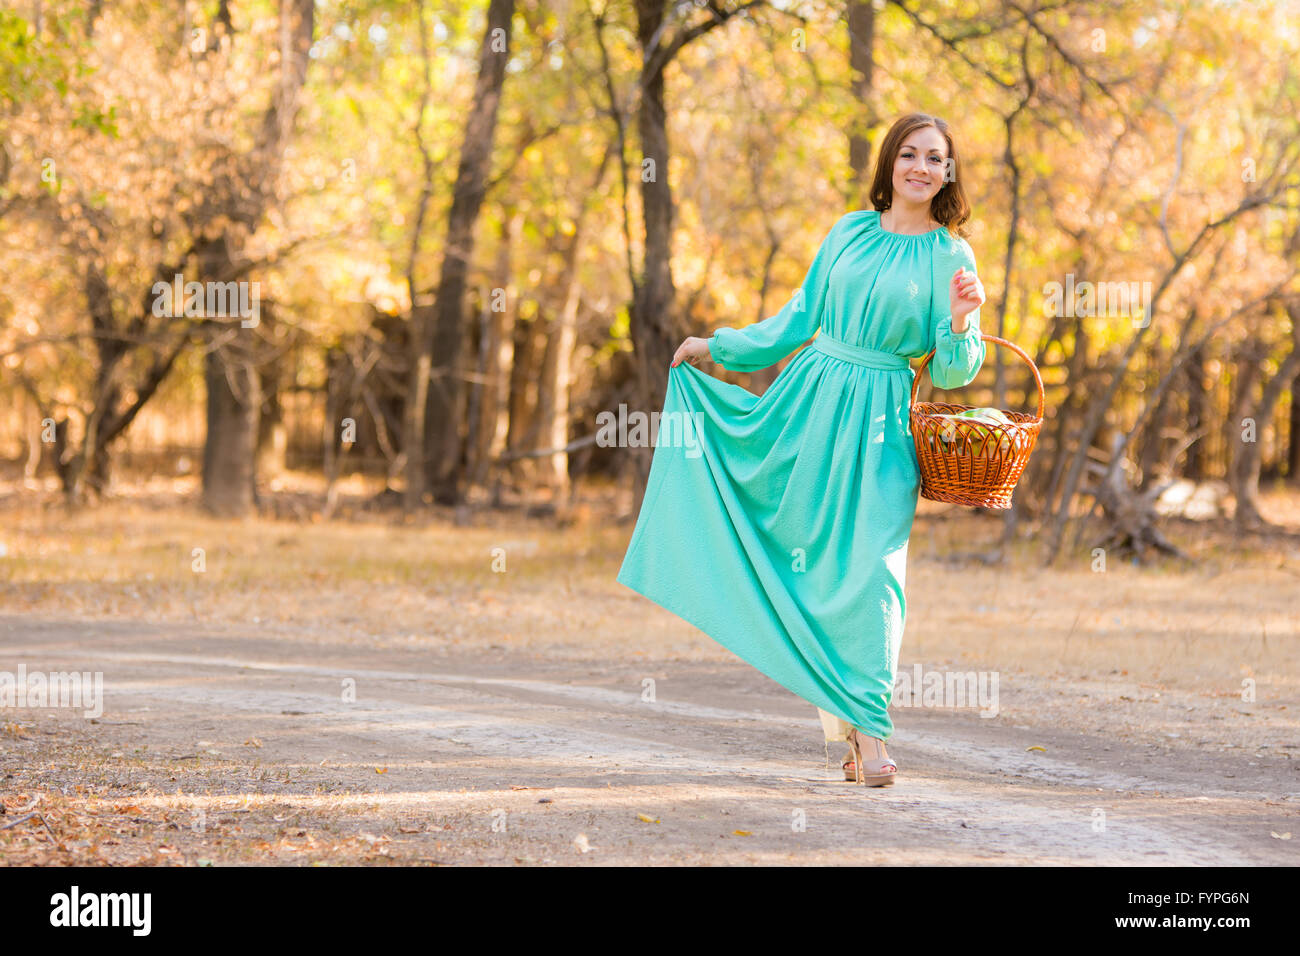 A girl in a long dress holding her dress and a basket of walking on the road Stock Photo